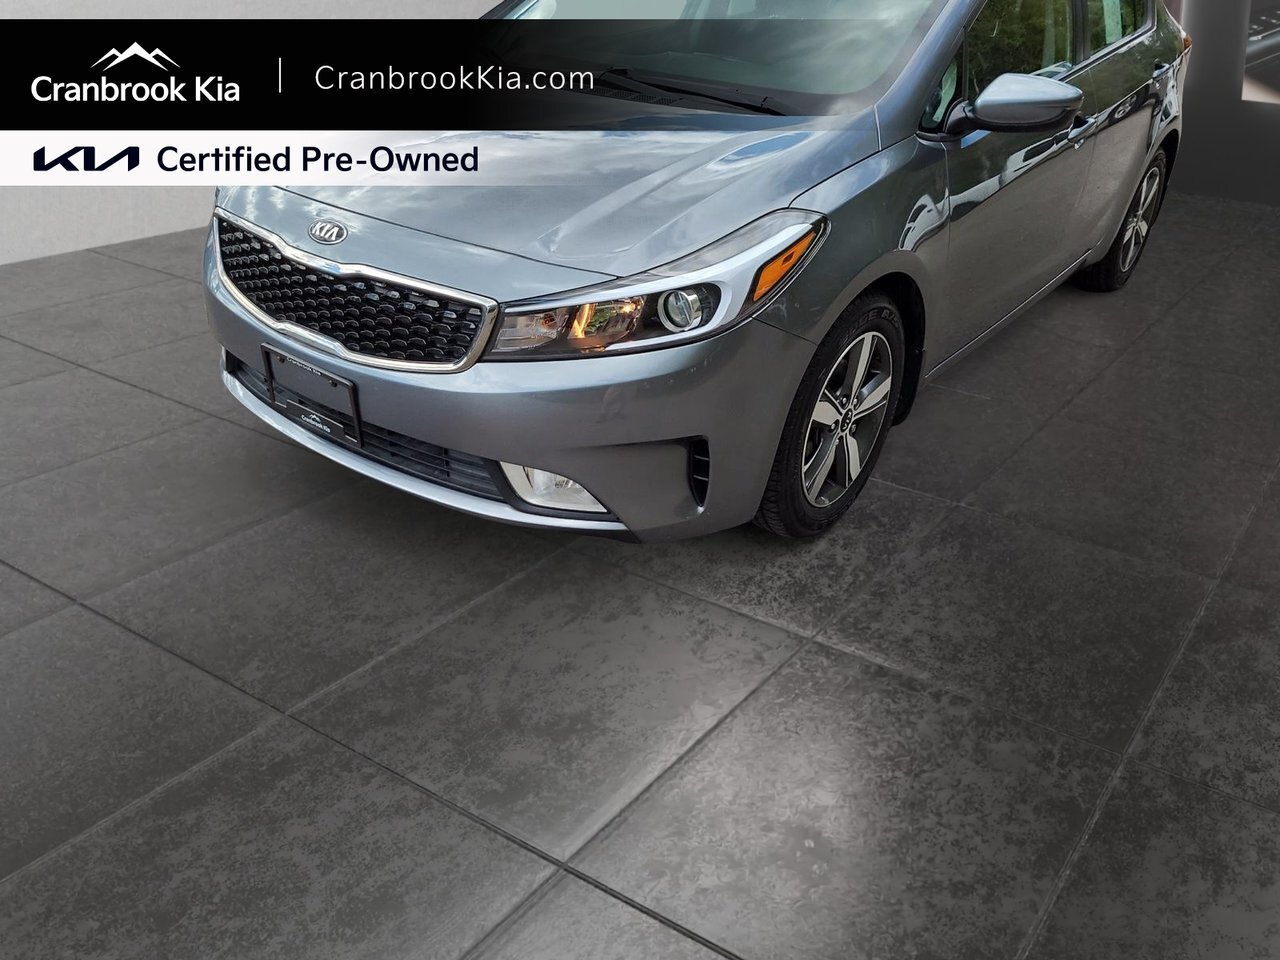 2018 Kia Forte LX+ Certified Pre-owned!